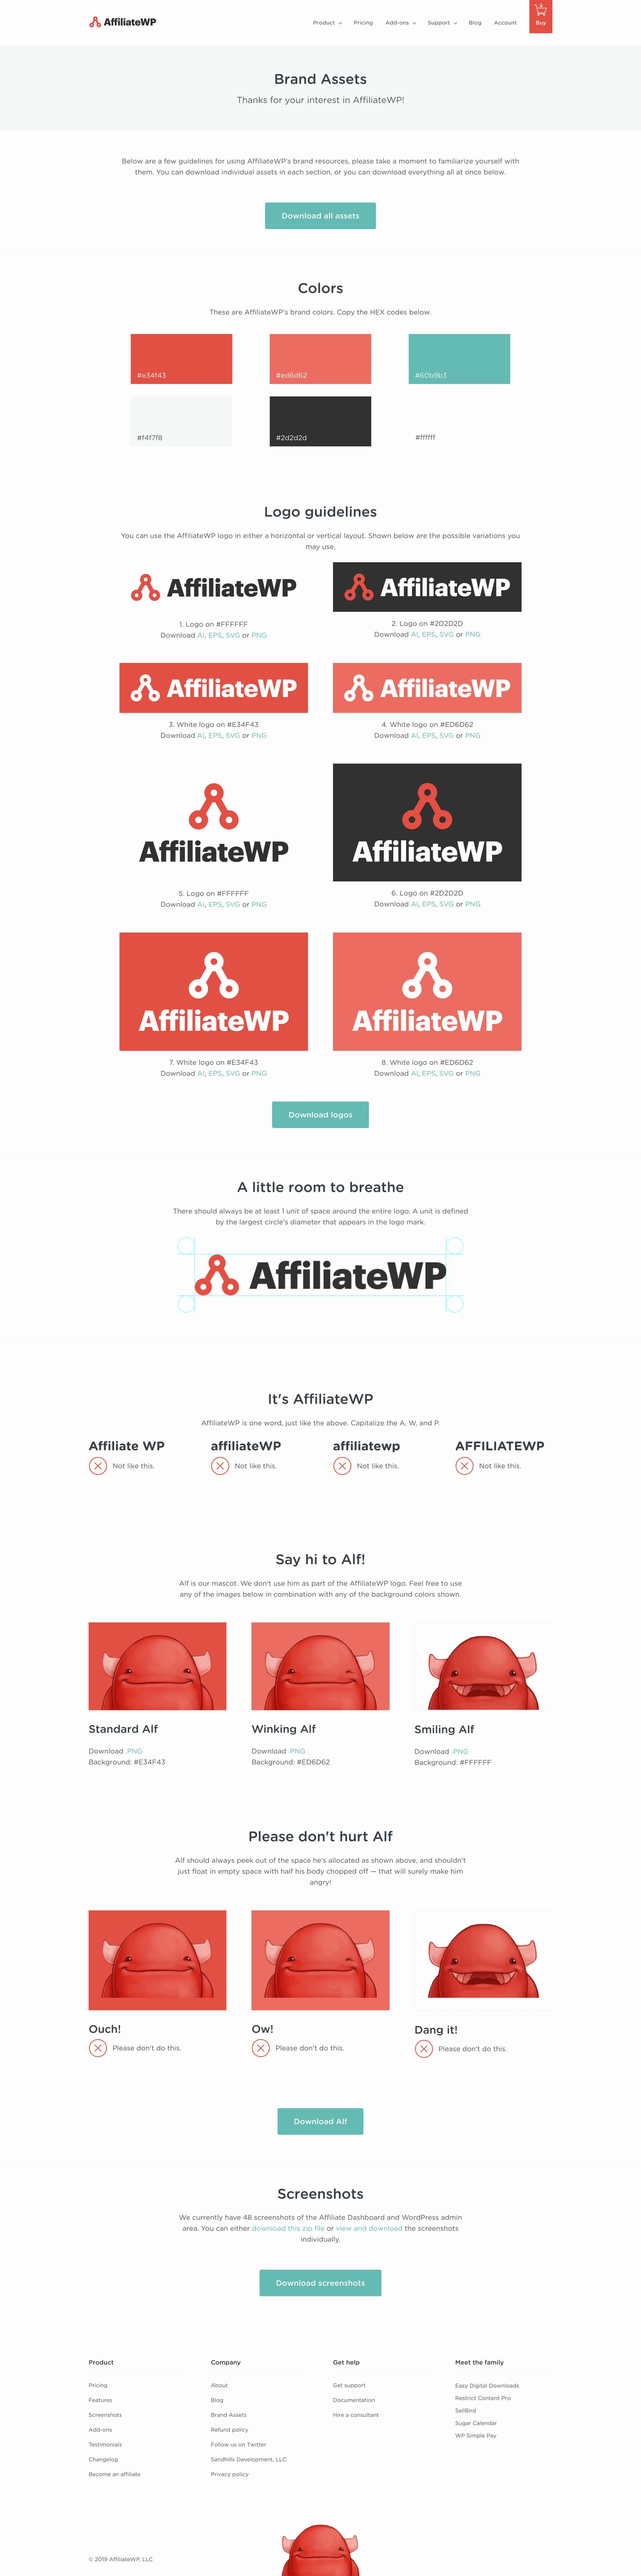 Brand assets page (AffiliateWP)